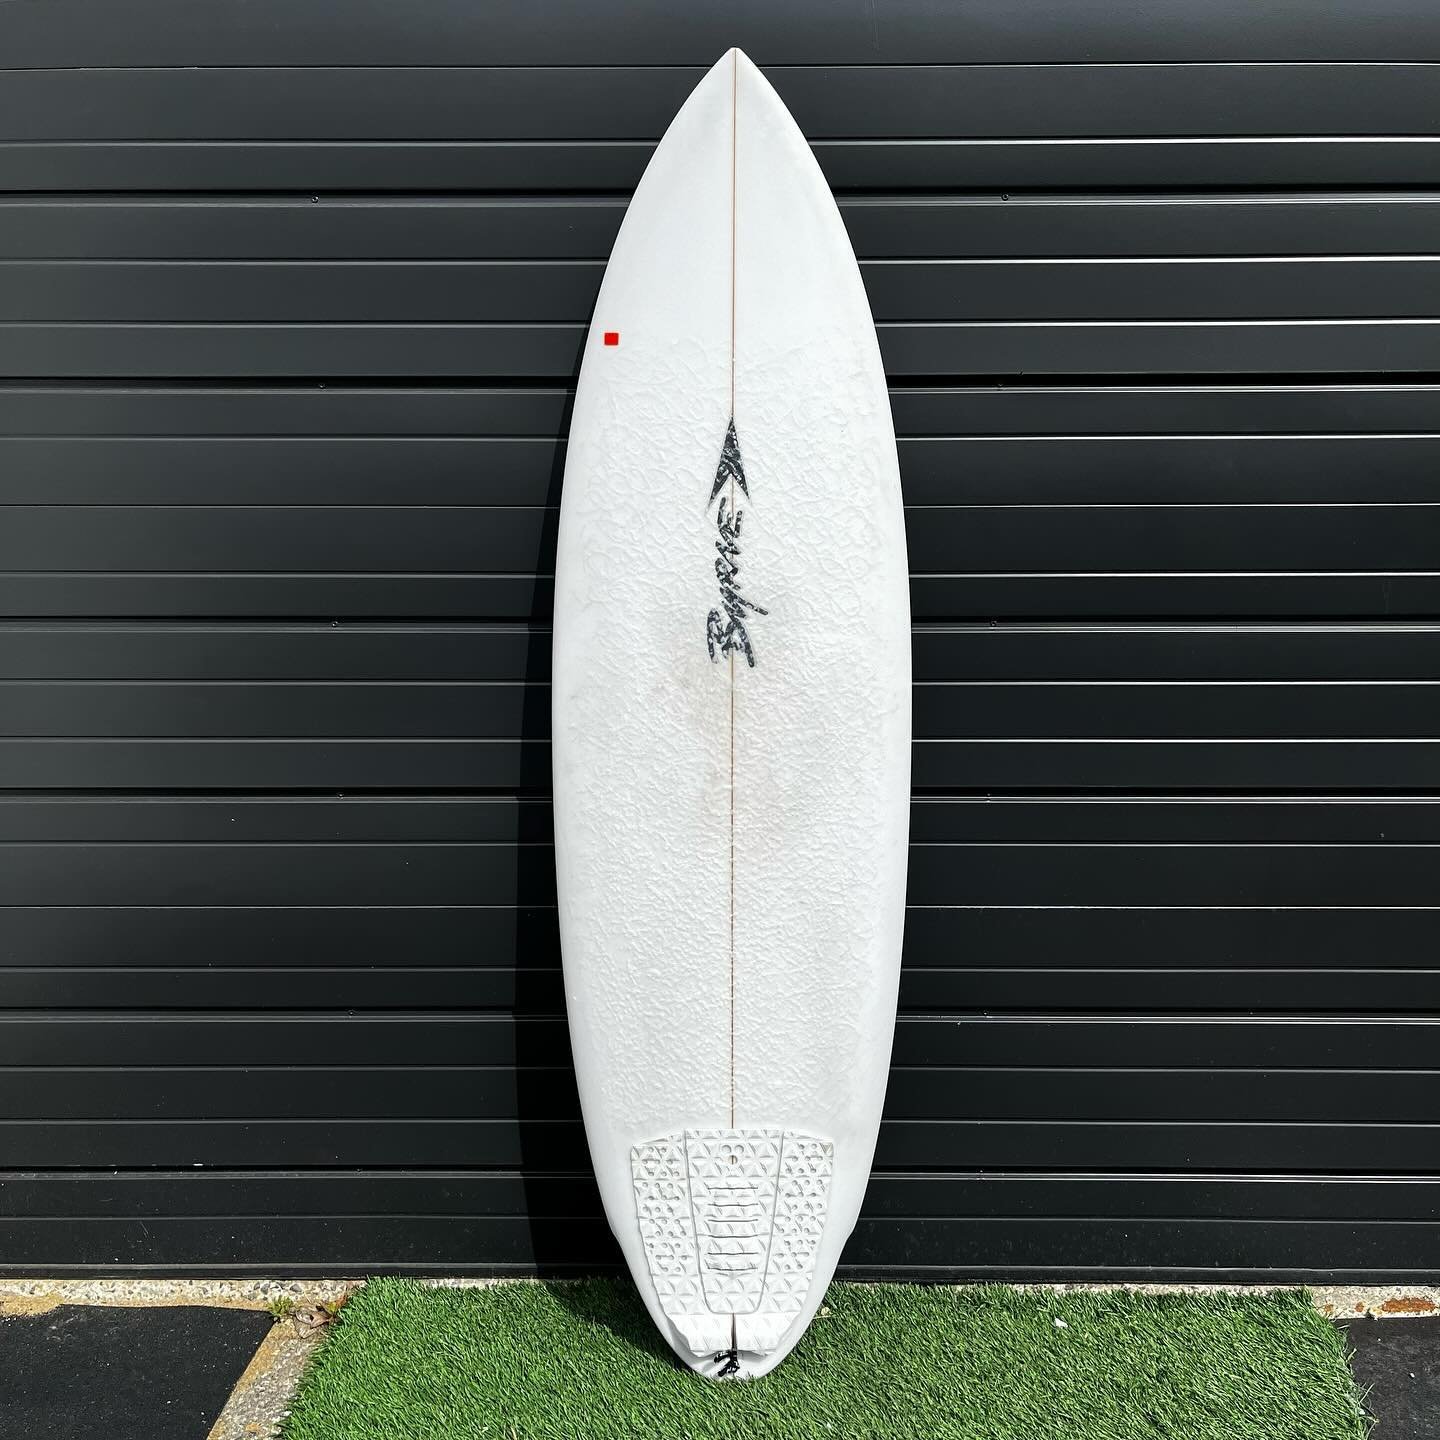 Used @byrne_surf channeled twin
6&rsquo;2 x 20.75 x 2.75 @ 38 Liters
Great condition 
-$599-